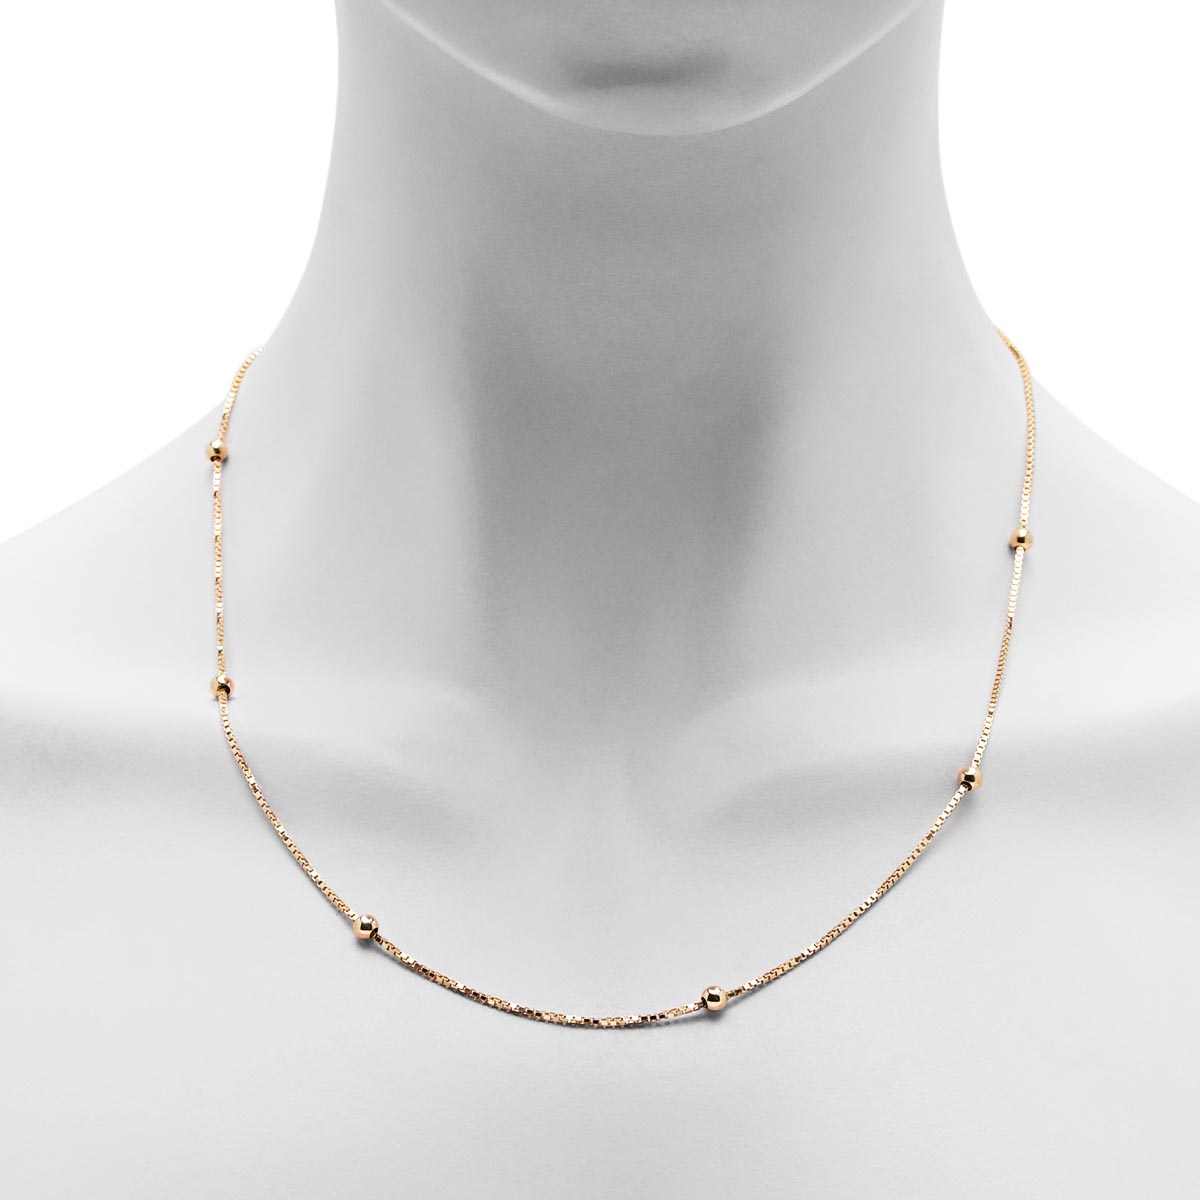 Estate Box Chain Bead Station Necklace in 14kt Yellow Gold